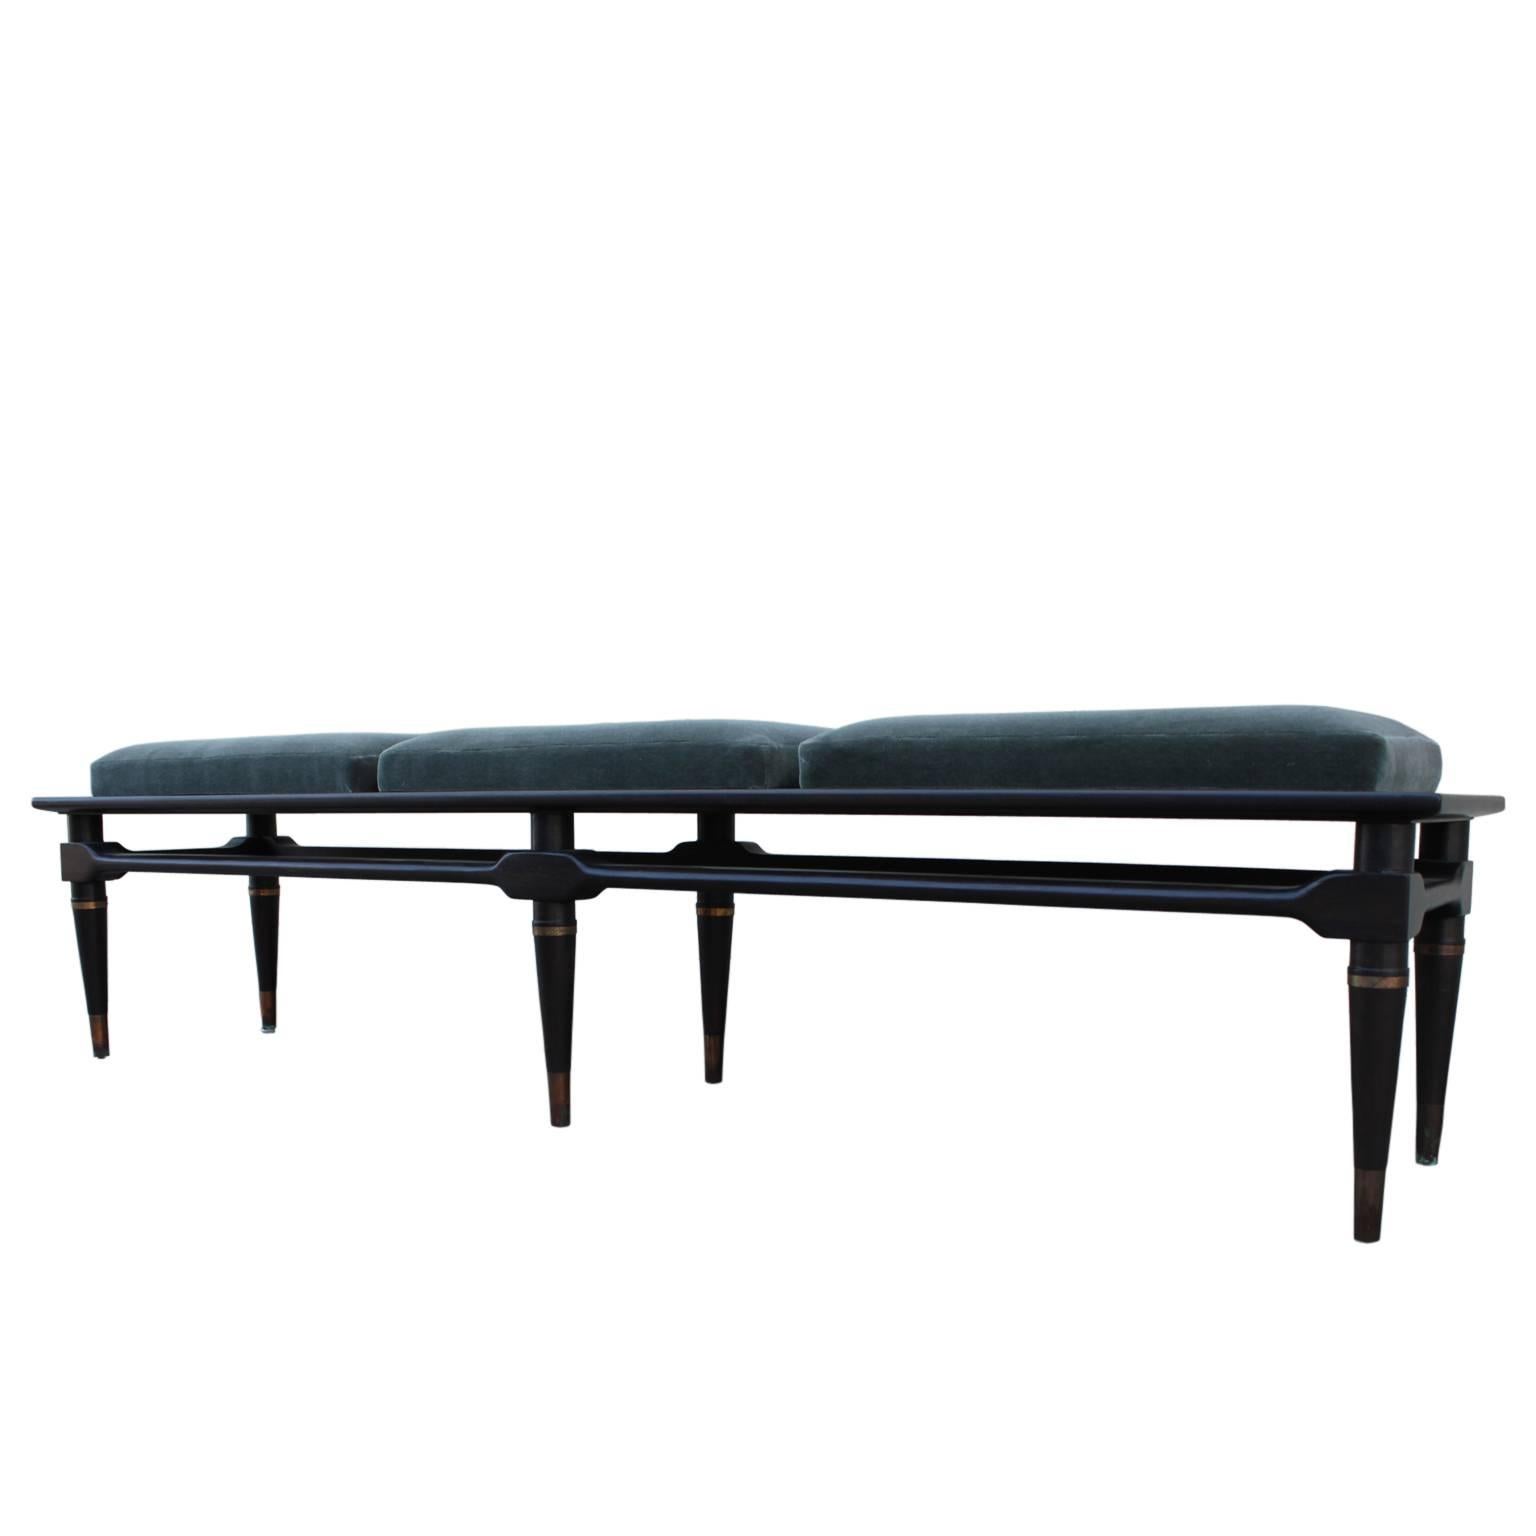 Mid-20th Century Modern Ebony Mohair Three-Seat Bench with Brass Accents